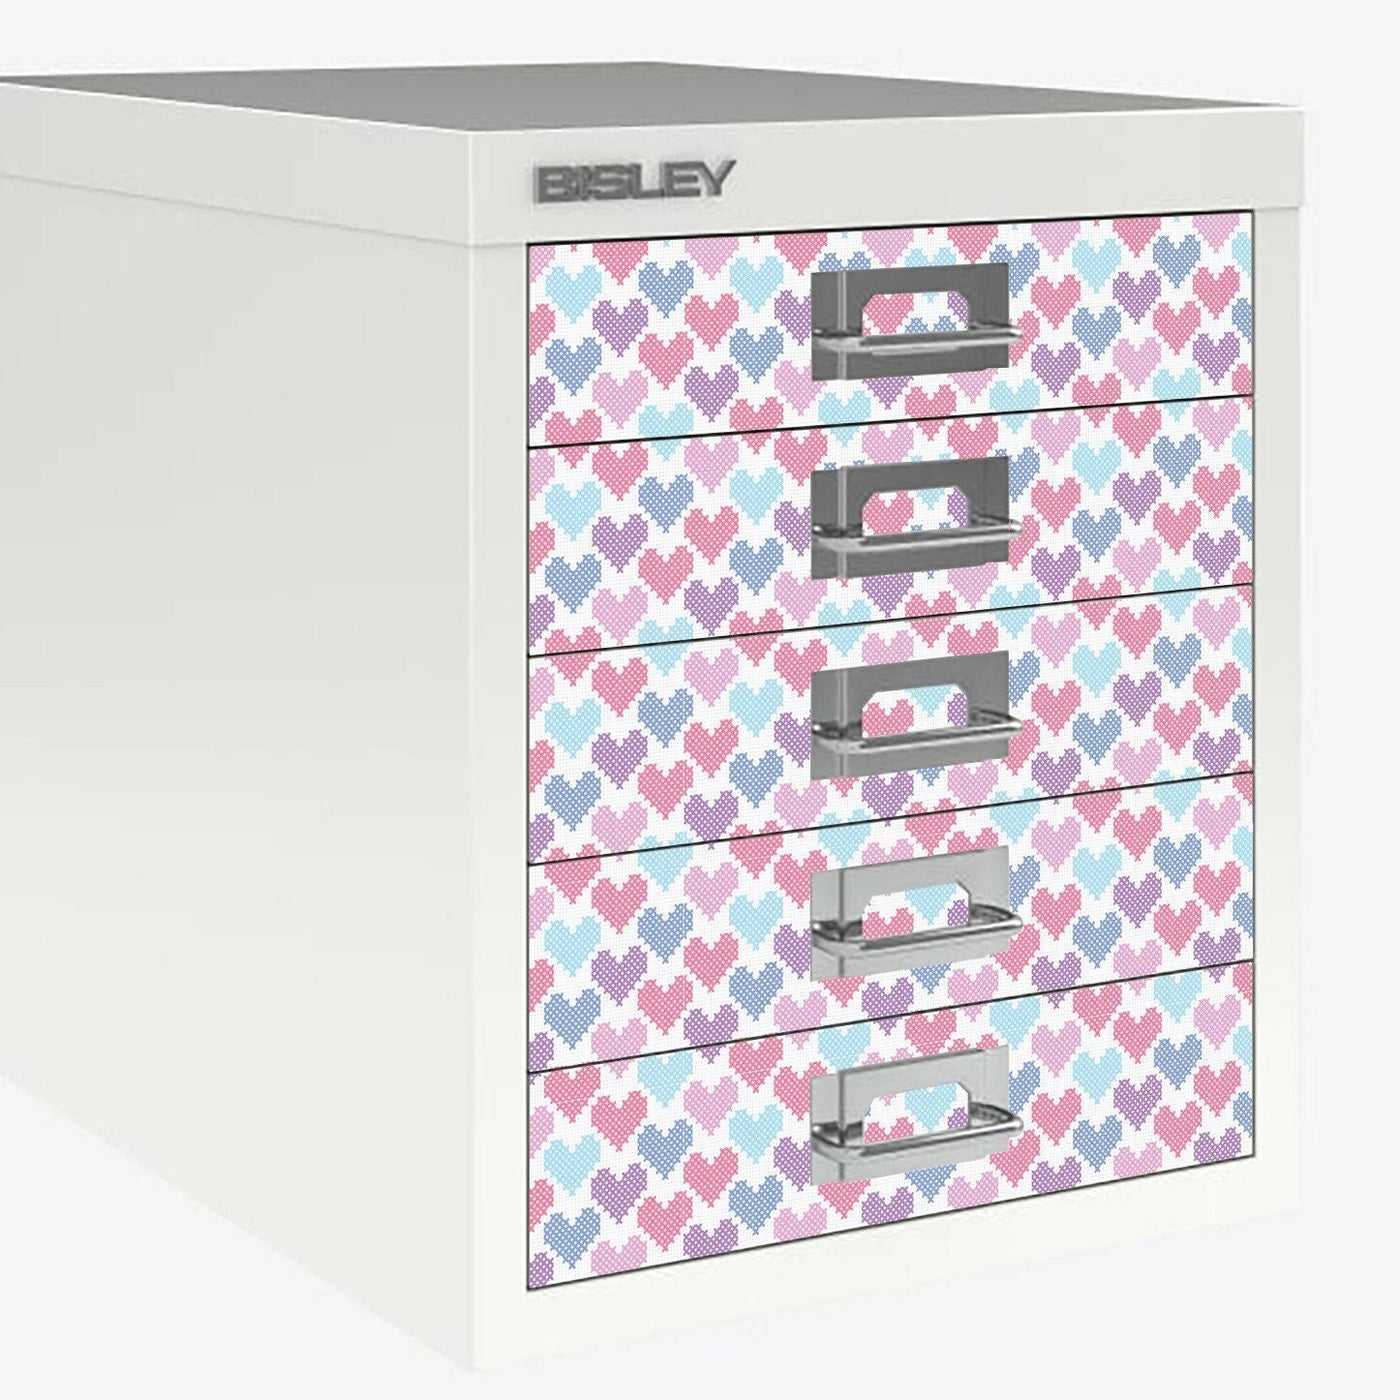 Cross stitch heart decals for Bisley 5 drawer cabinet (not included)